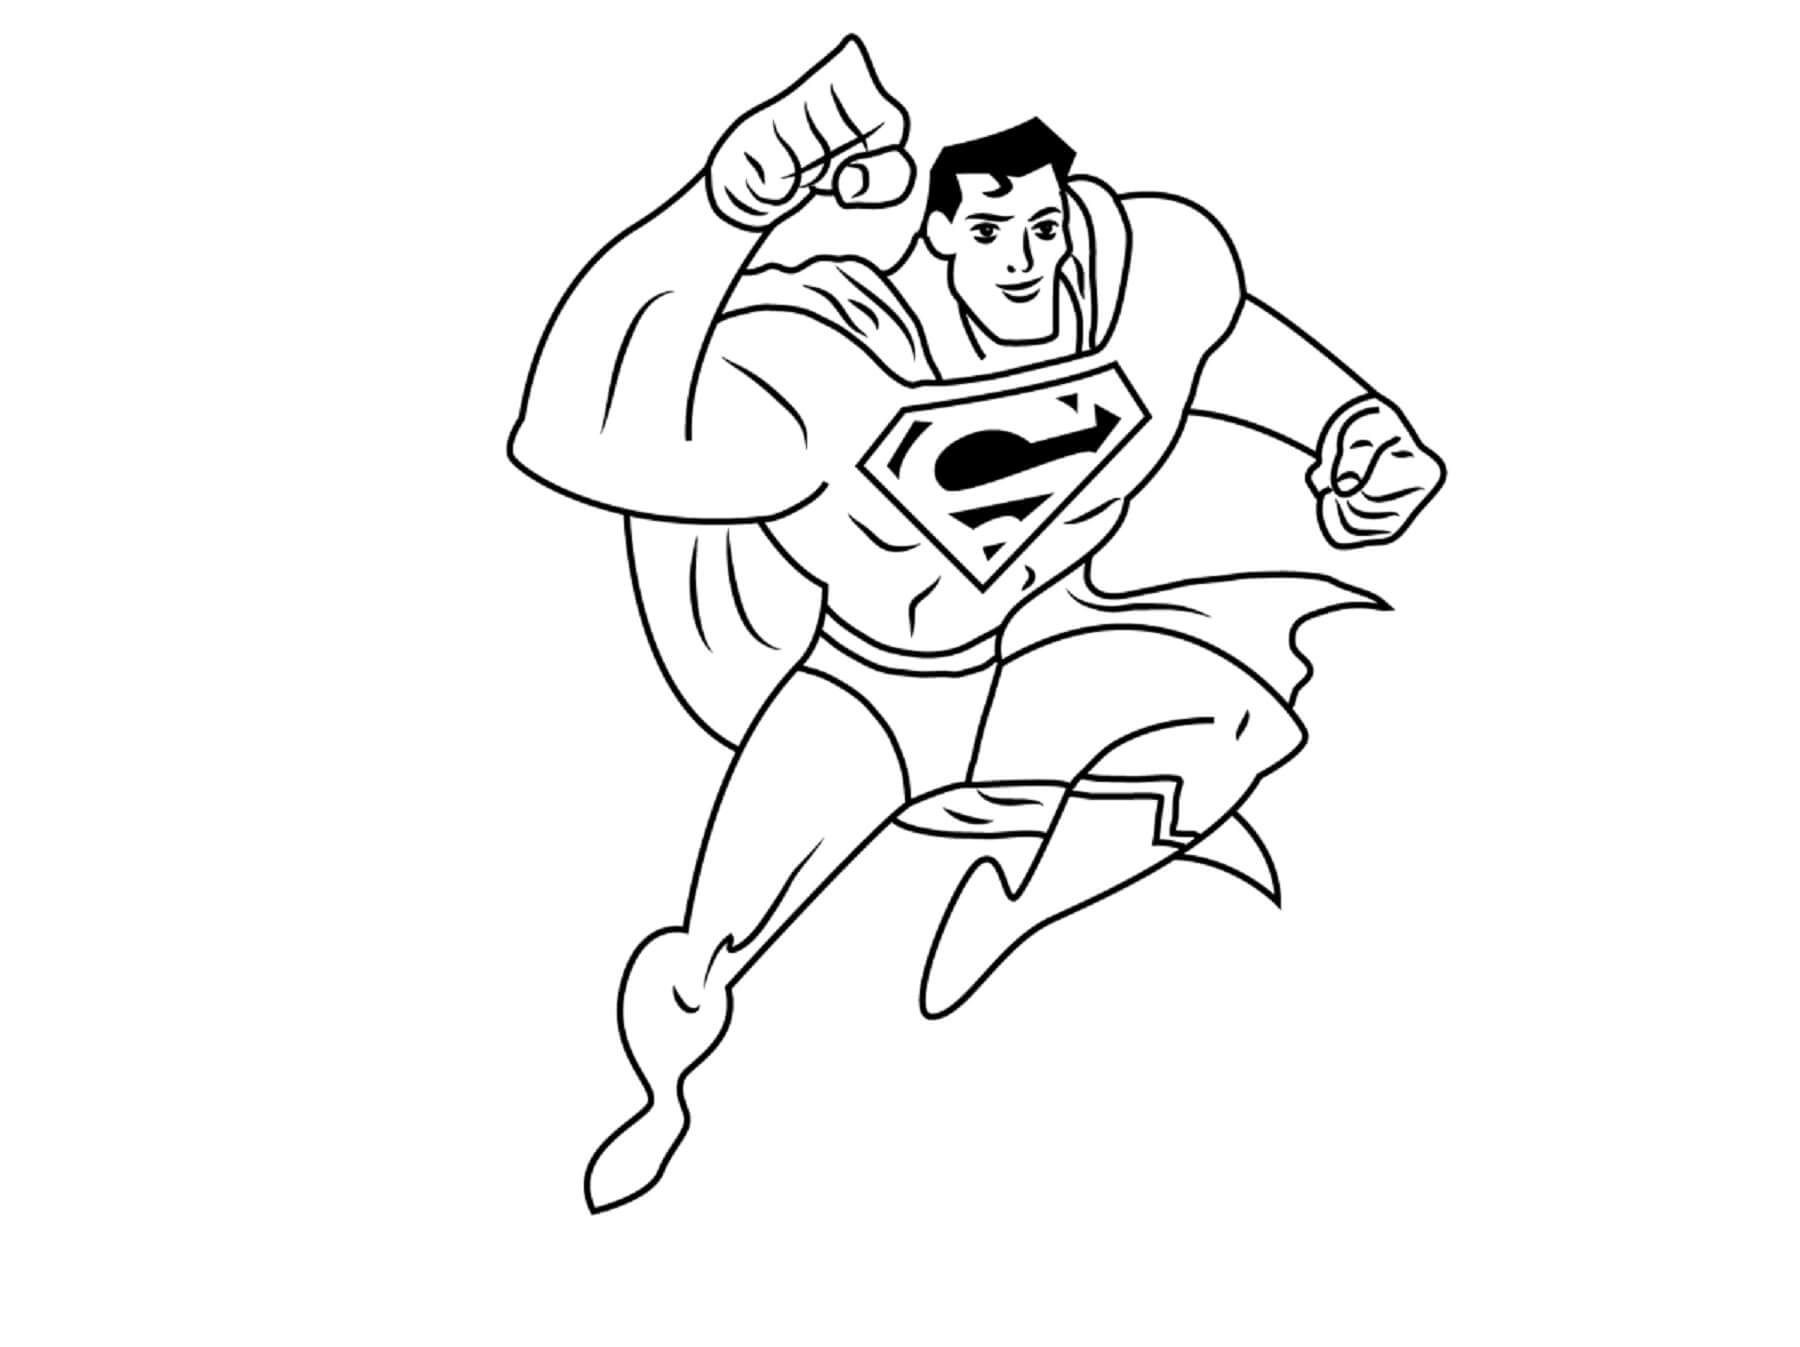 Funny superman attack coloring page